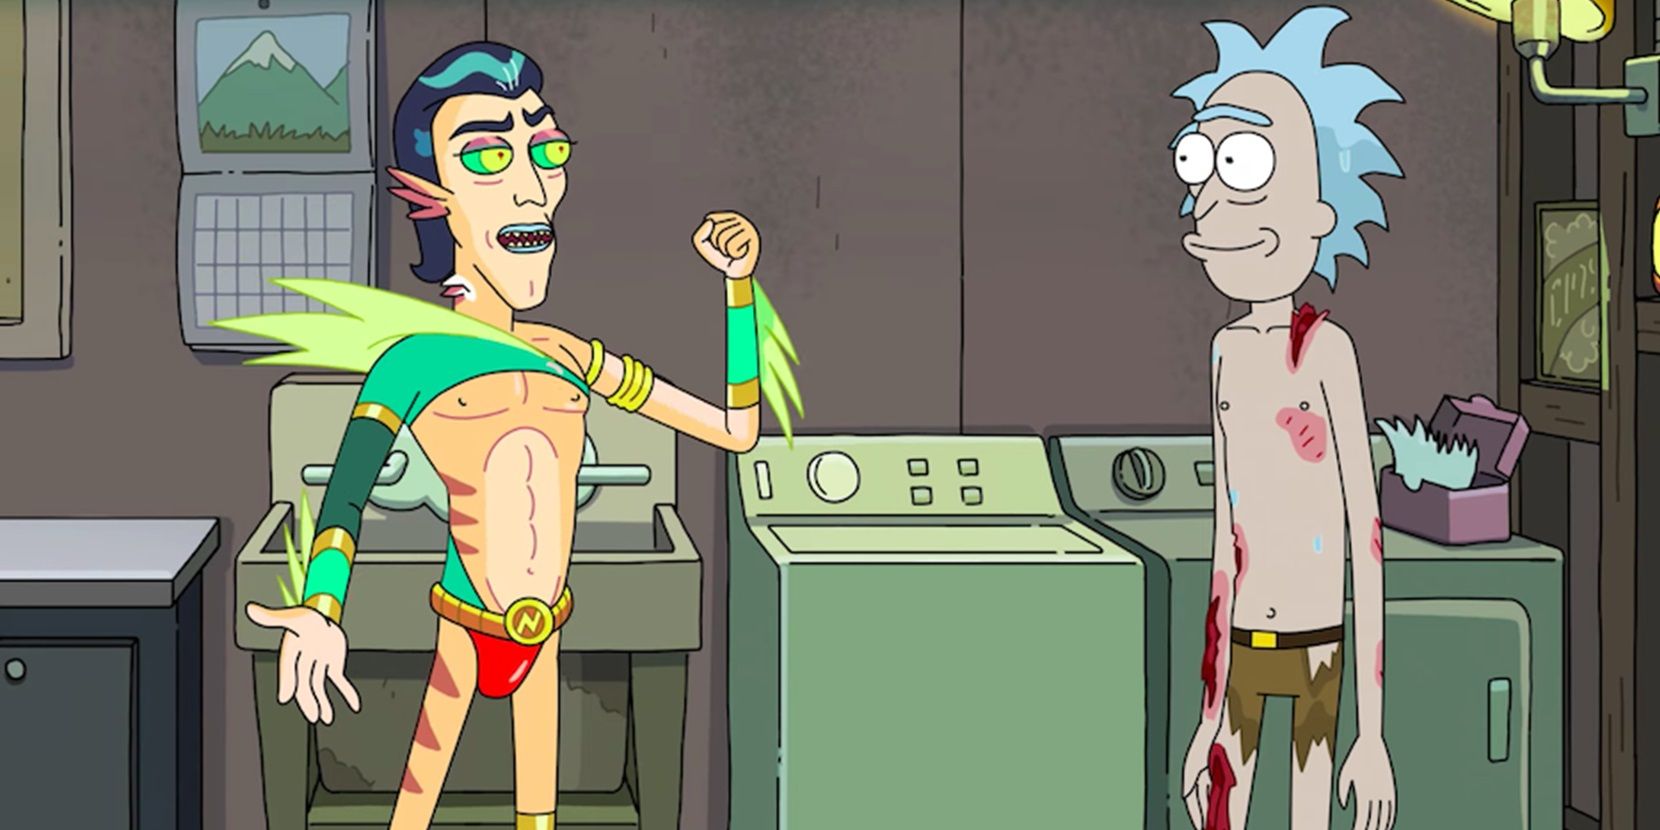 Mr Nimbus confronts Rick in Rick and Morty